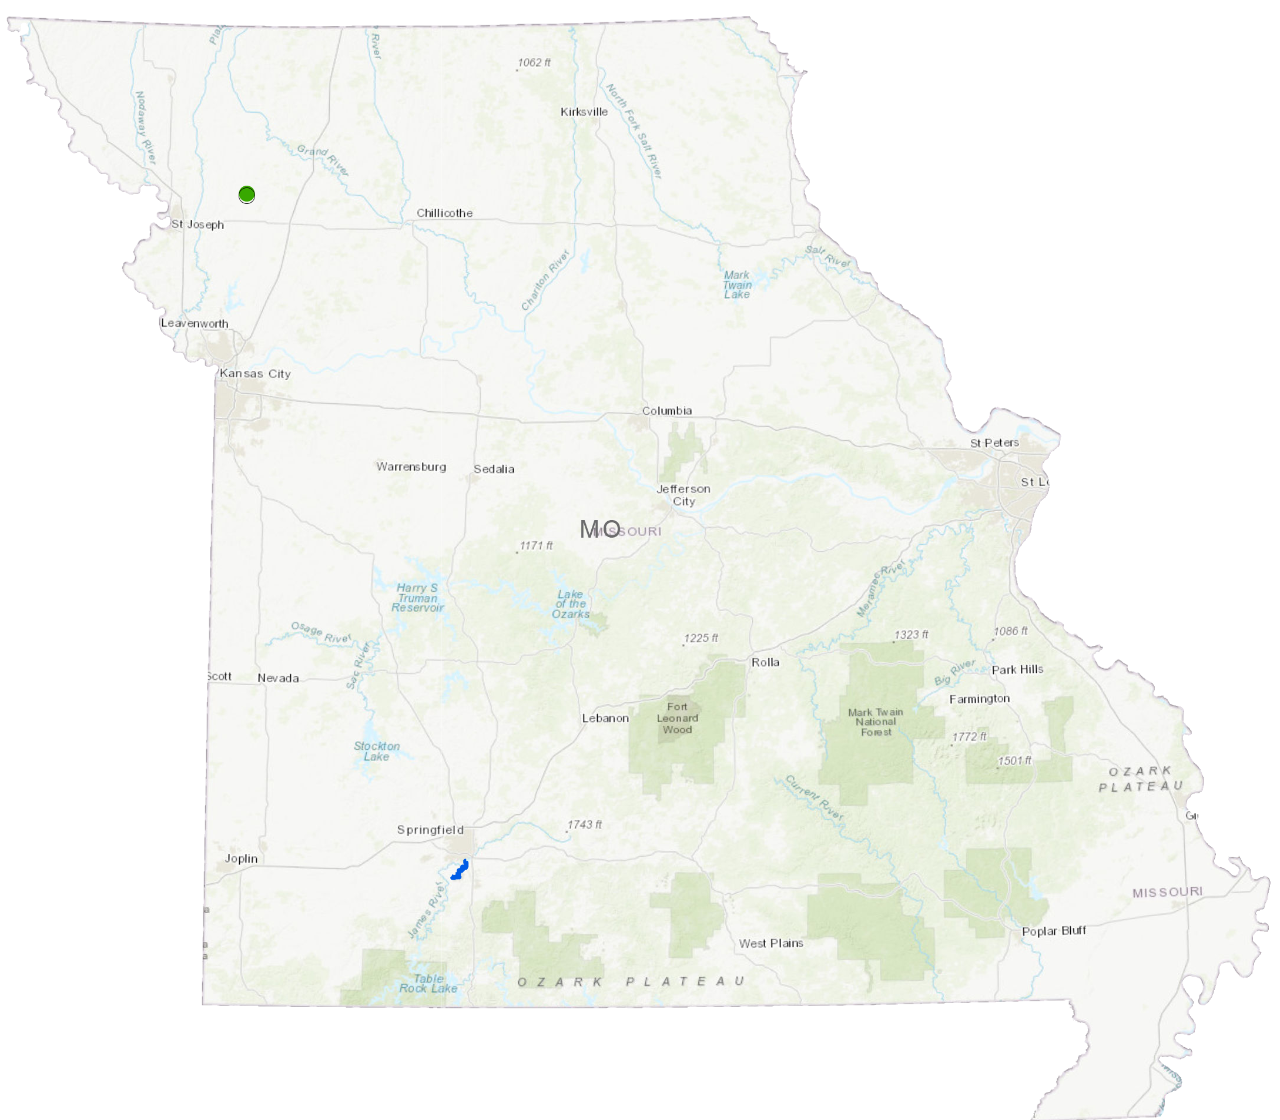 Map of the state of Missouri showcasing the many project technology locations